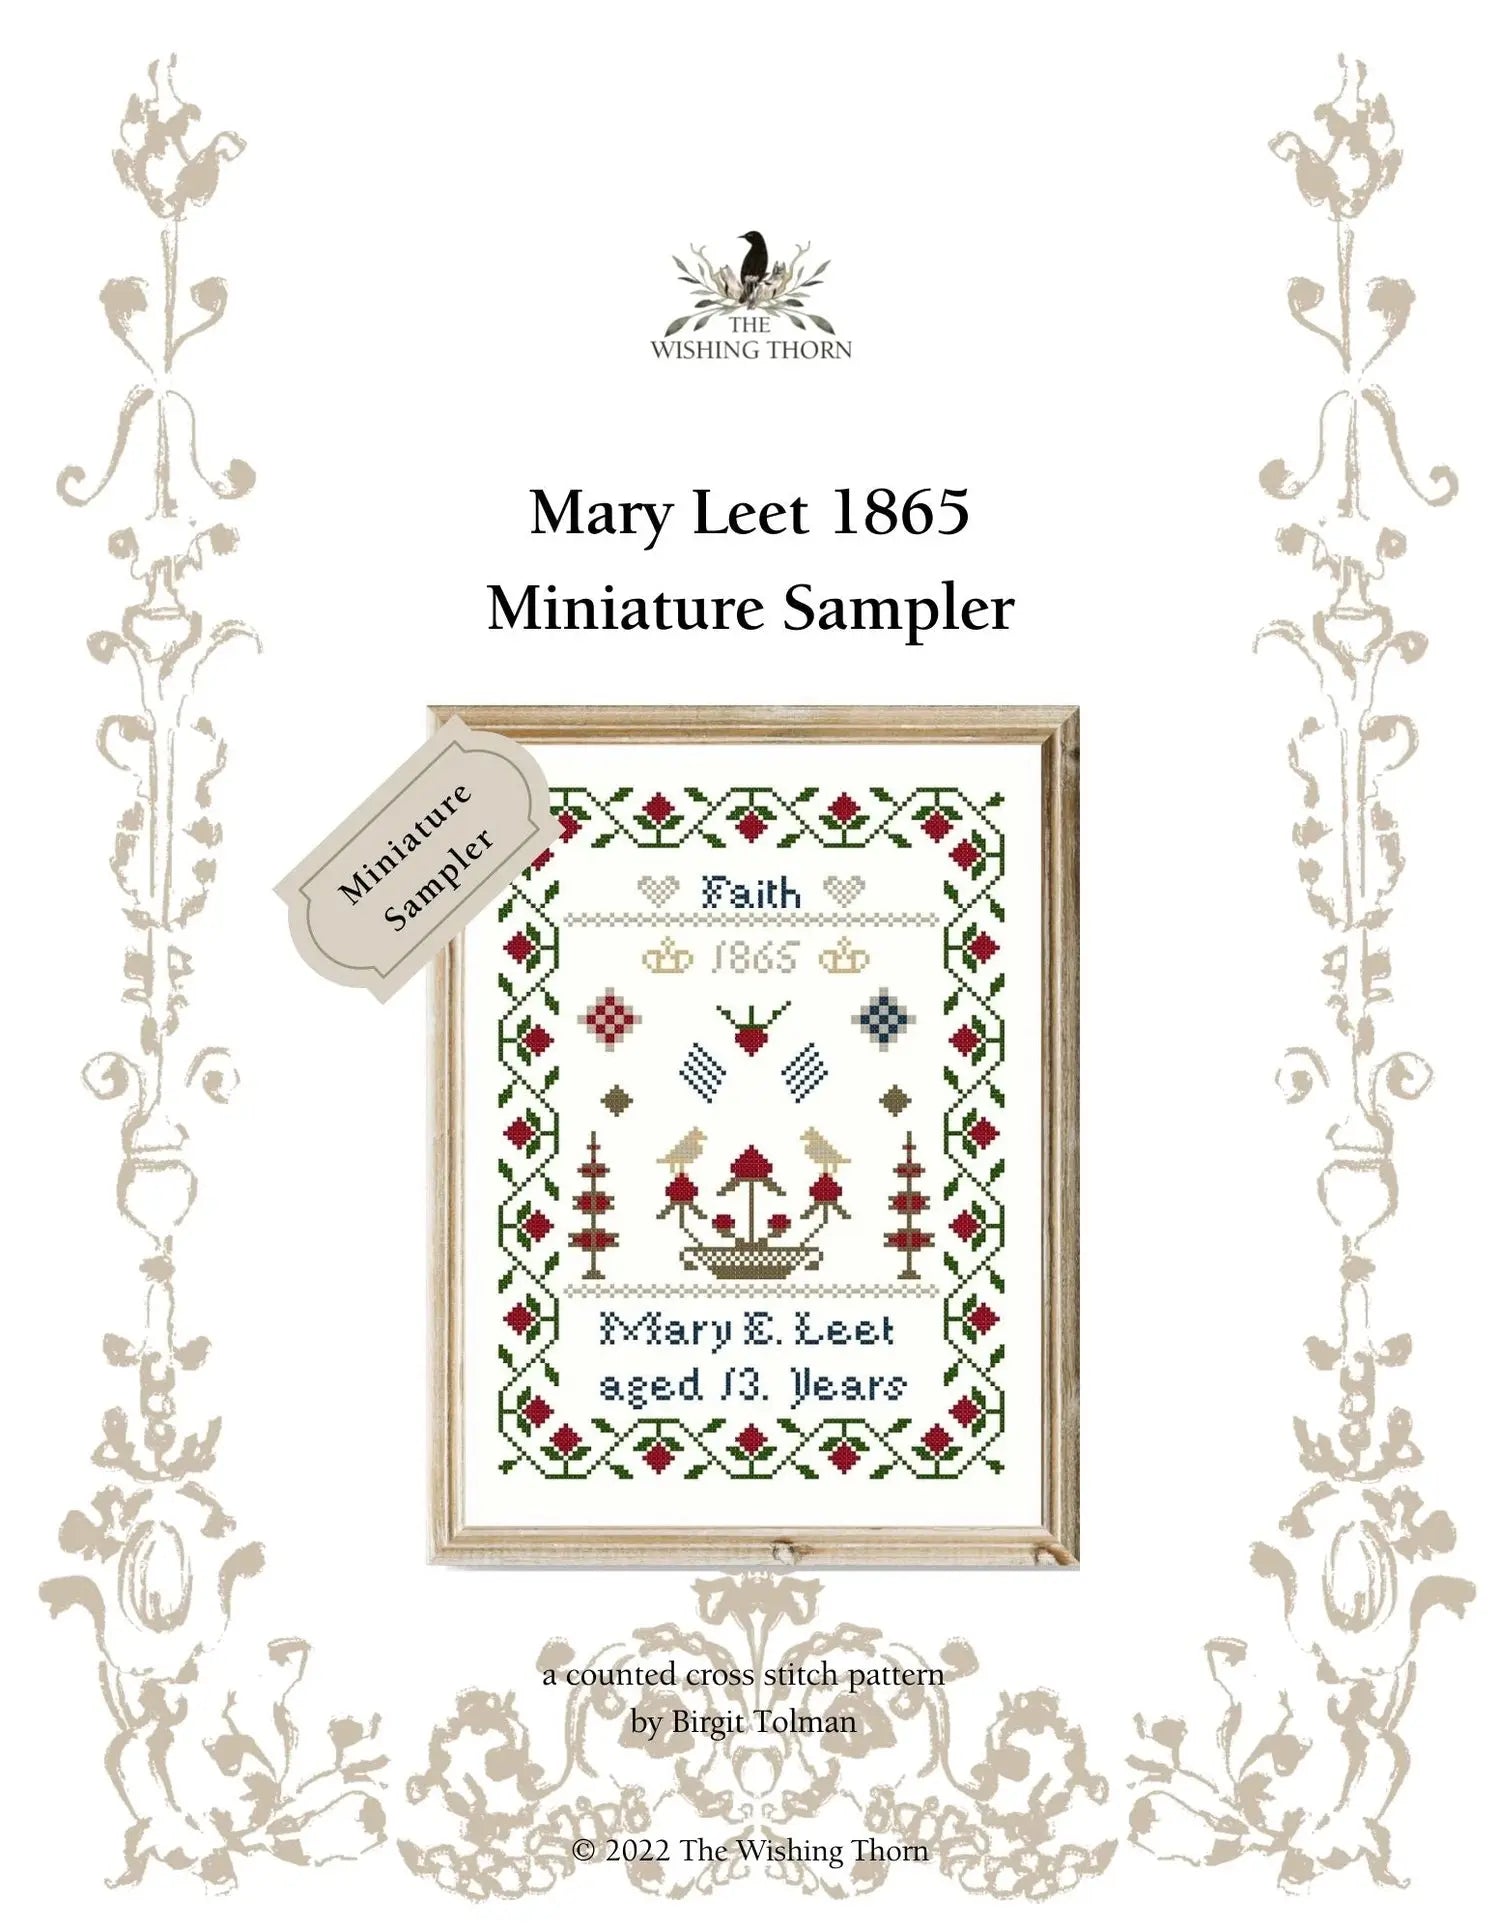 Mary Leet 1865 Miniature Sampler by The Wishing Thorn The Wishing Thorn